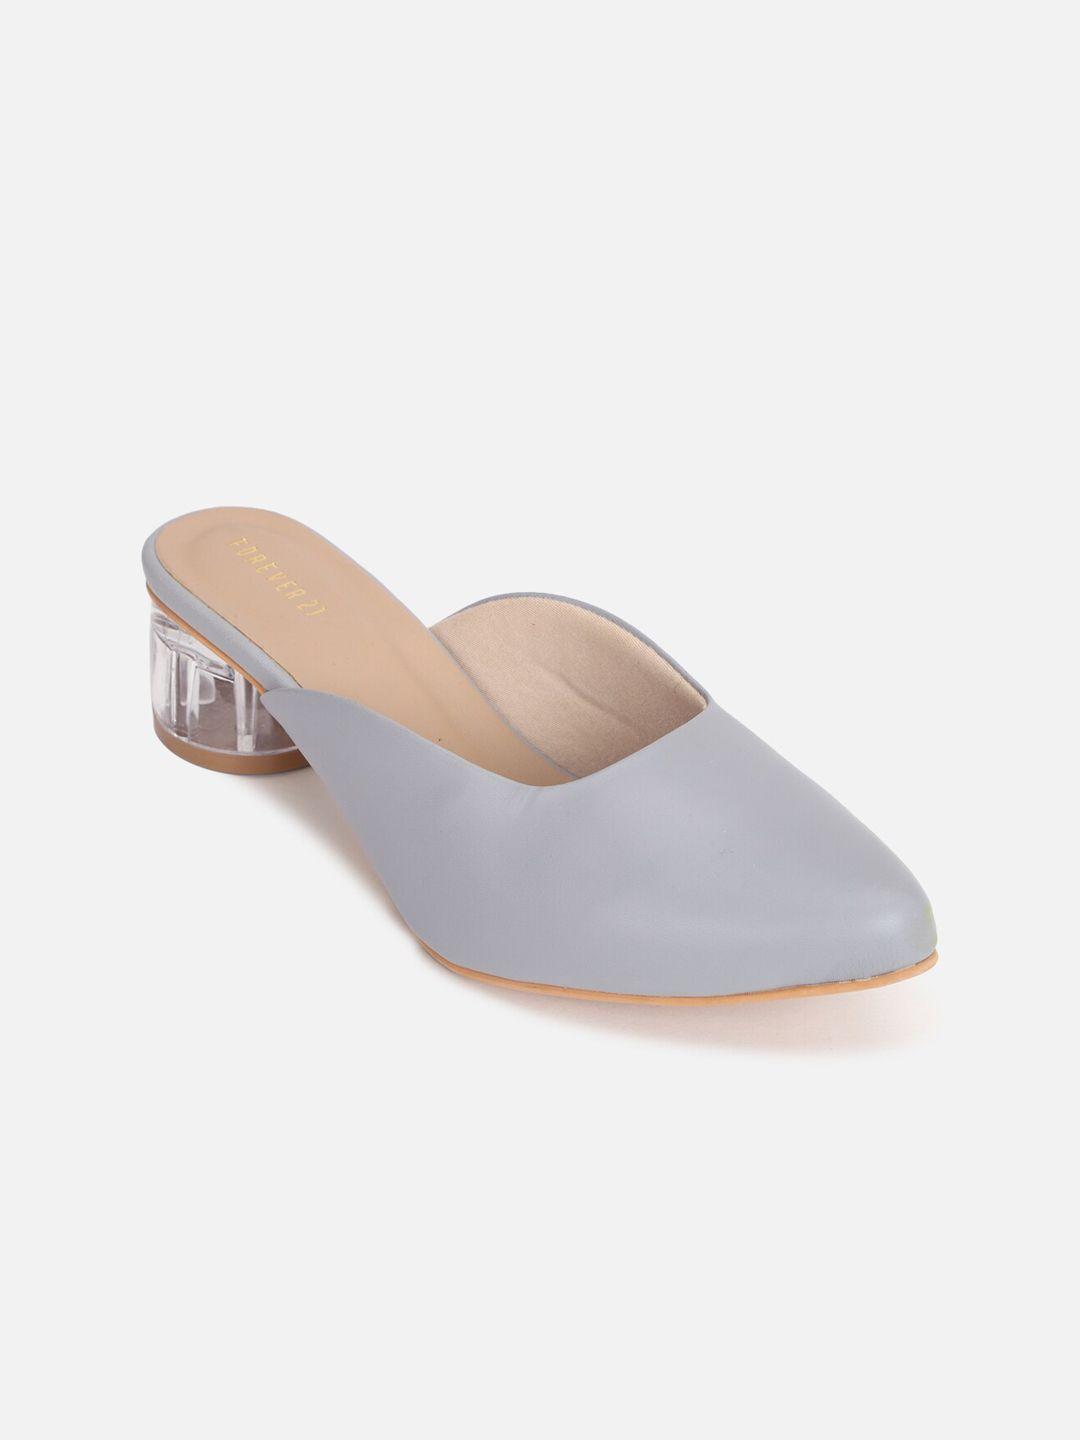 forever 21 pointed toe block mules